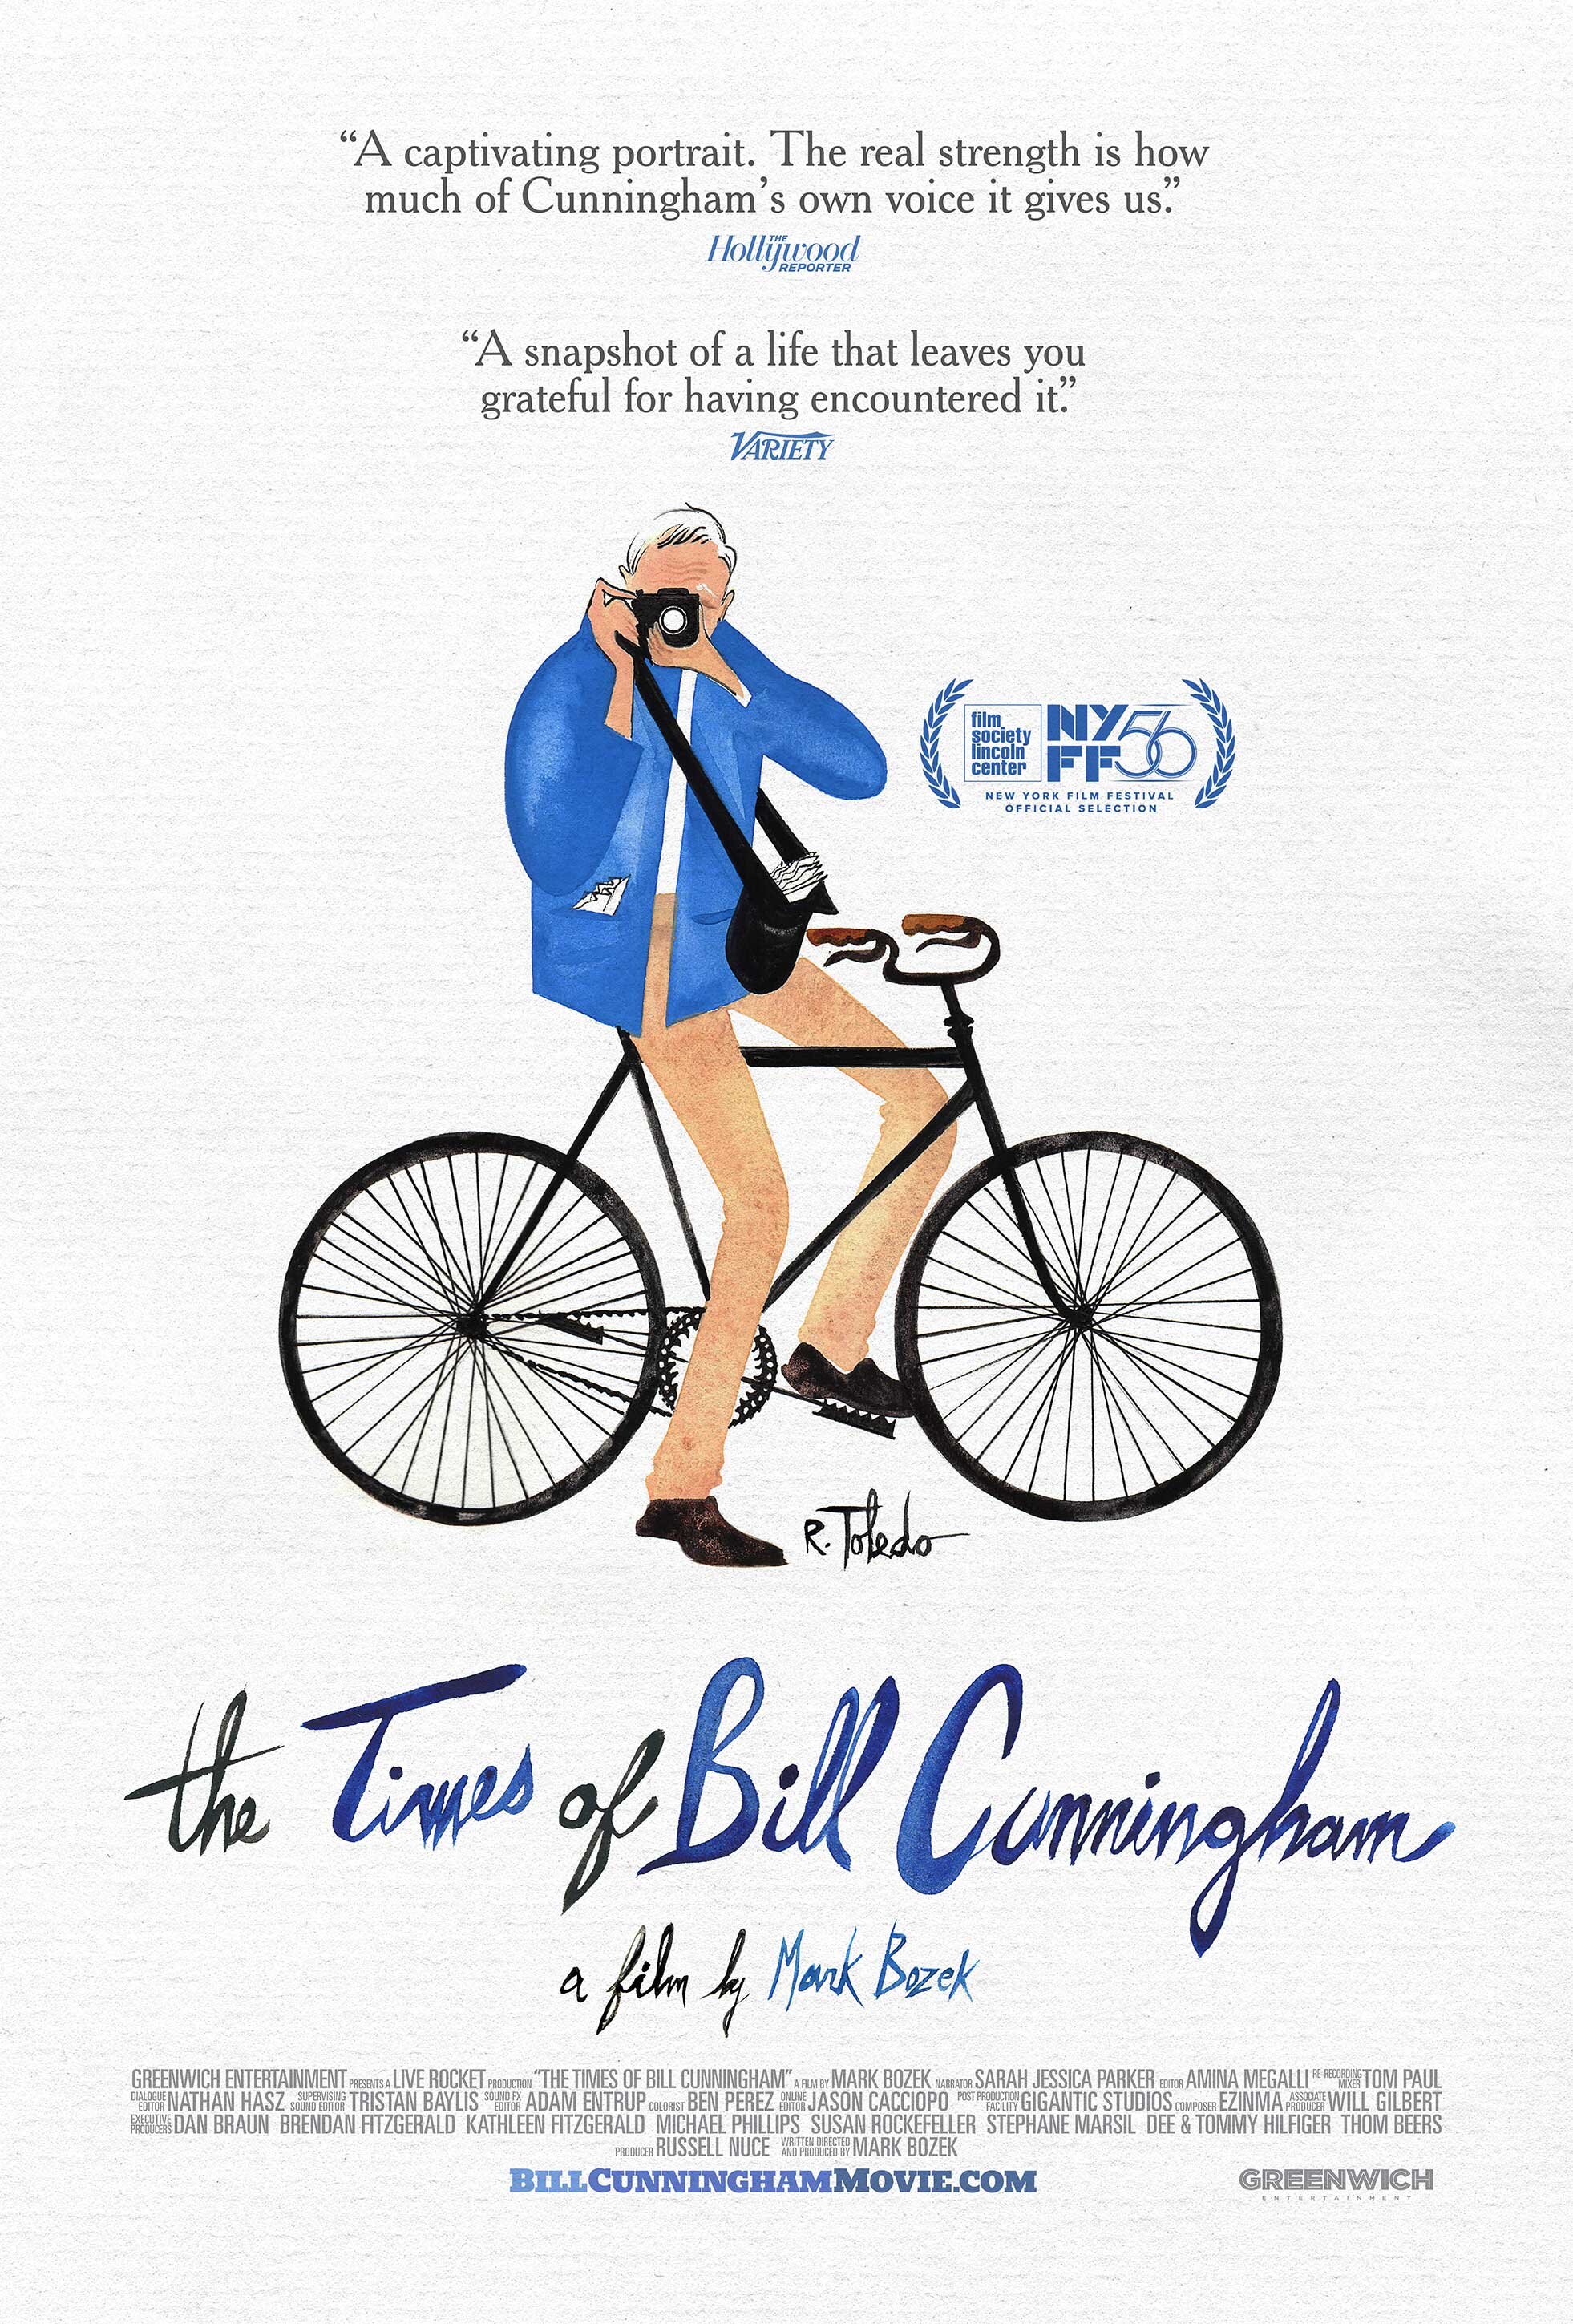 Theatrical Poster - THE TIMES OF BILL CUNNINGHAM - Courtesy of Greenwich Entertainment.jpg